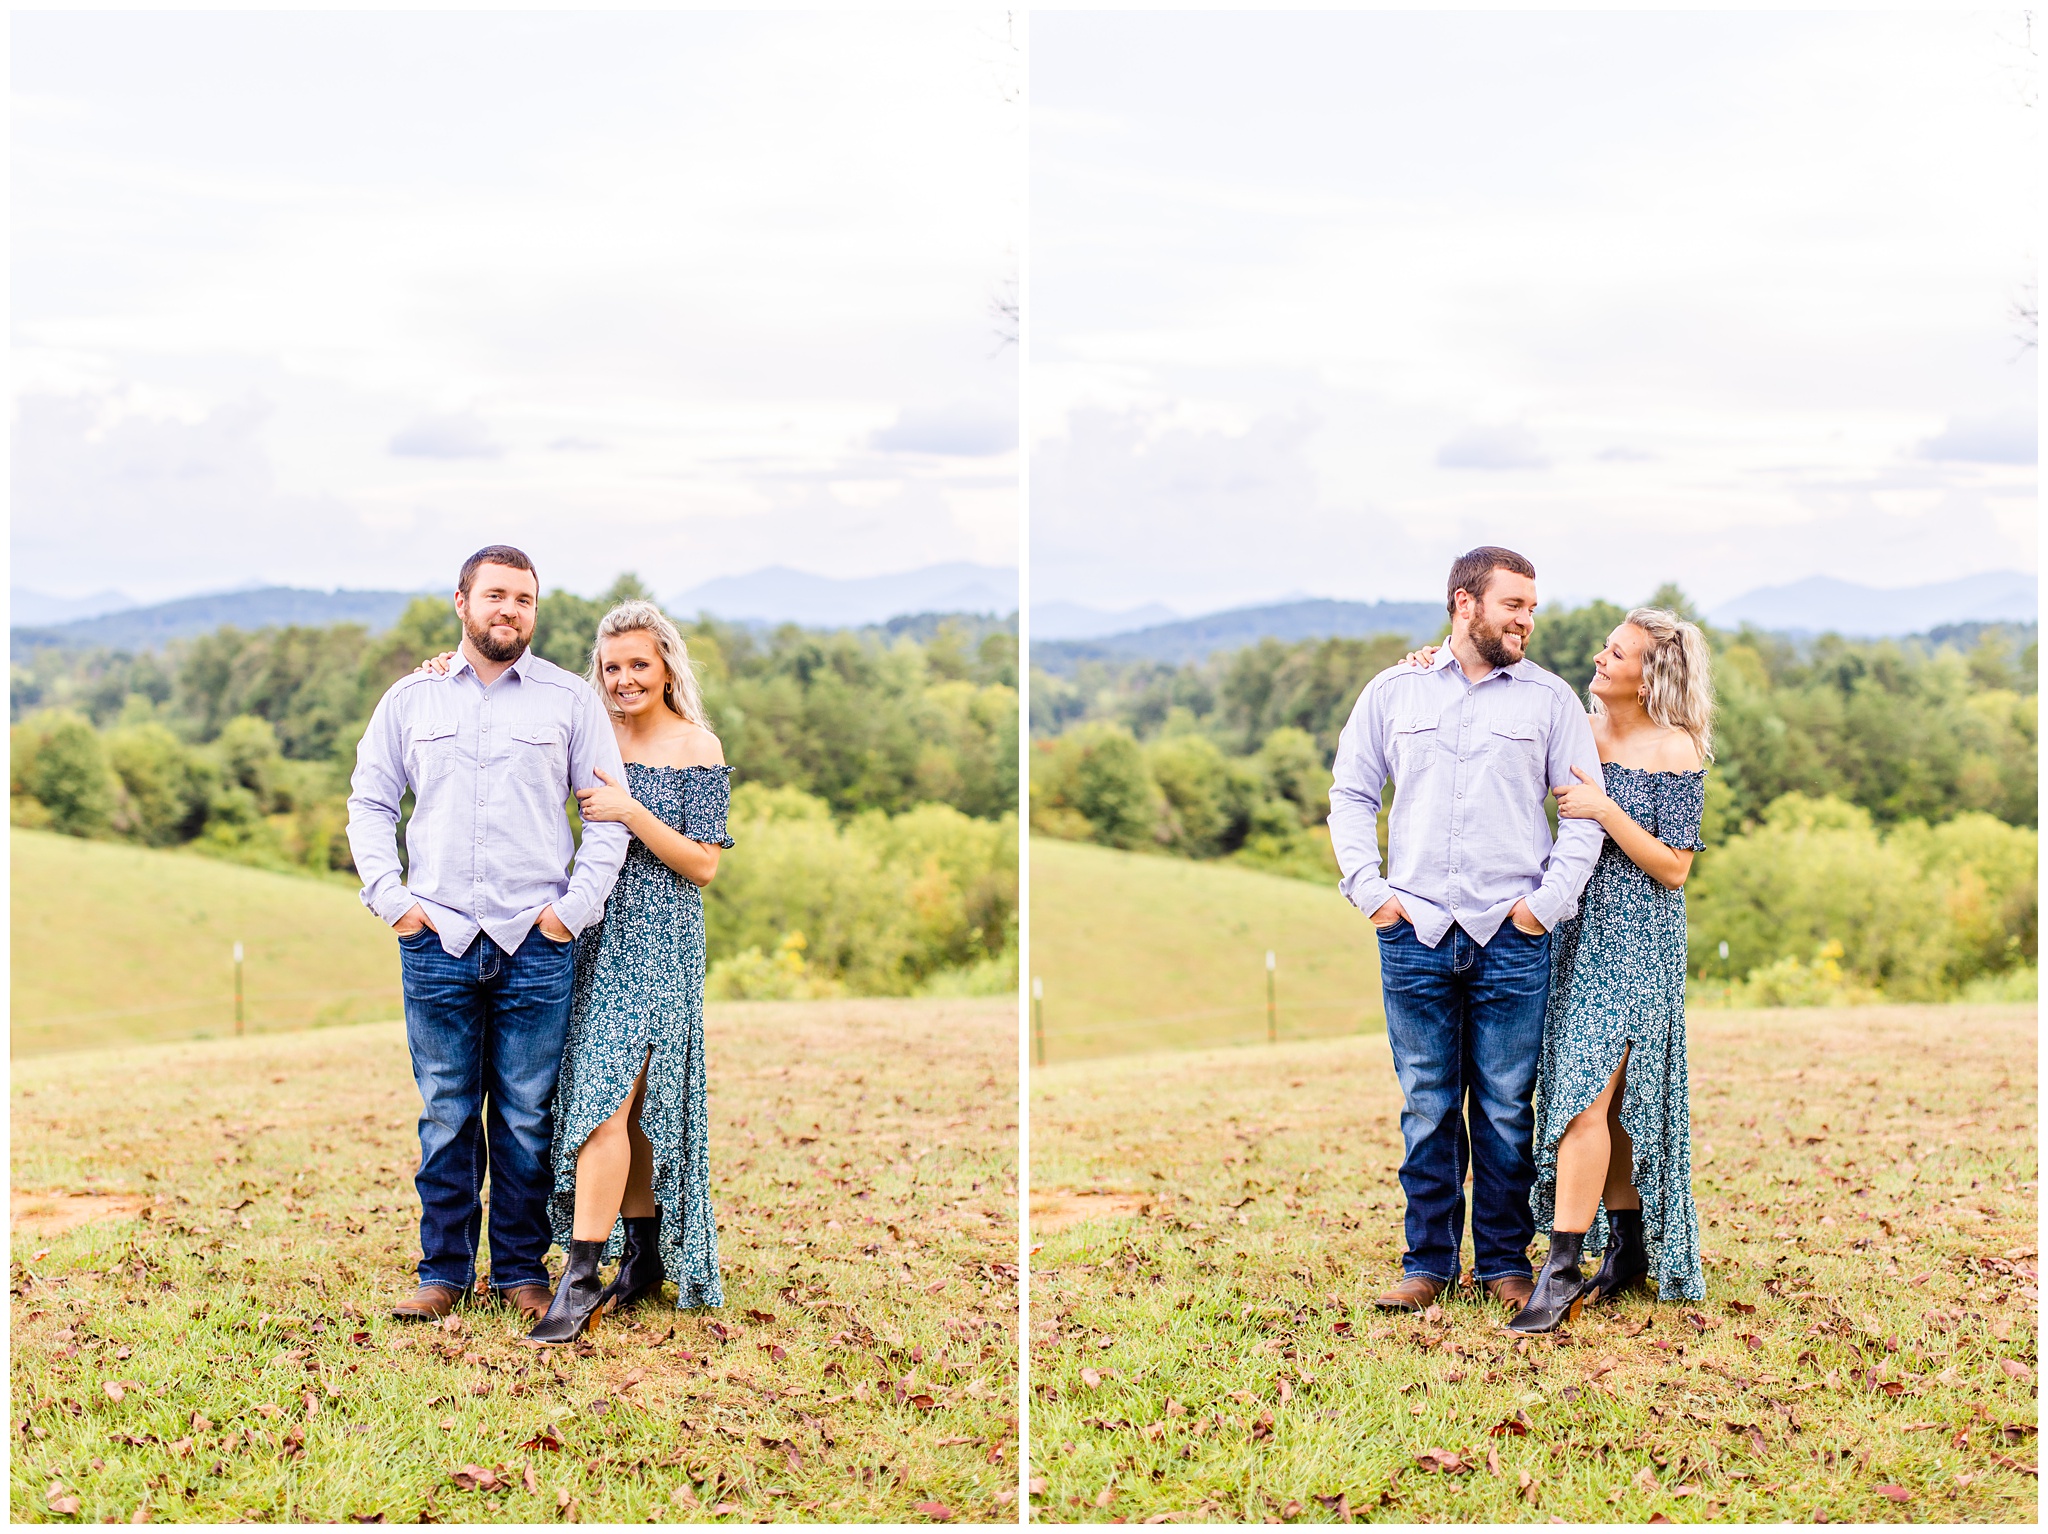 couple poses outdoors with mountains behind them for photo shoot